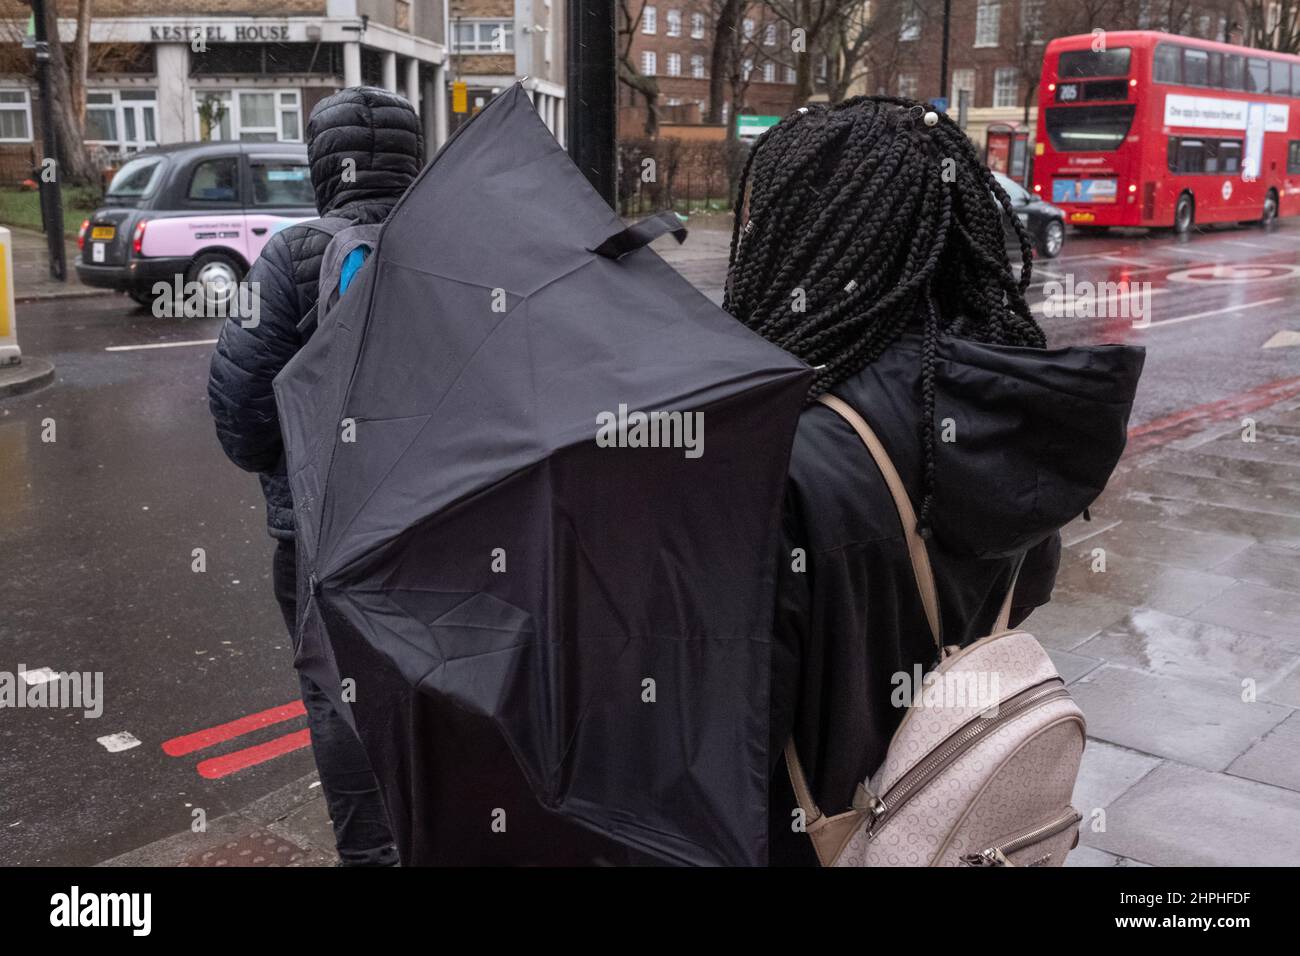 A woman struggles with umbrella on a stormy day in London UK Stock Photo